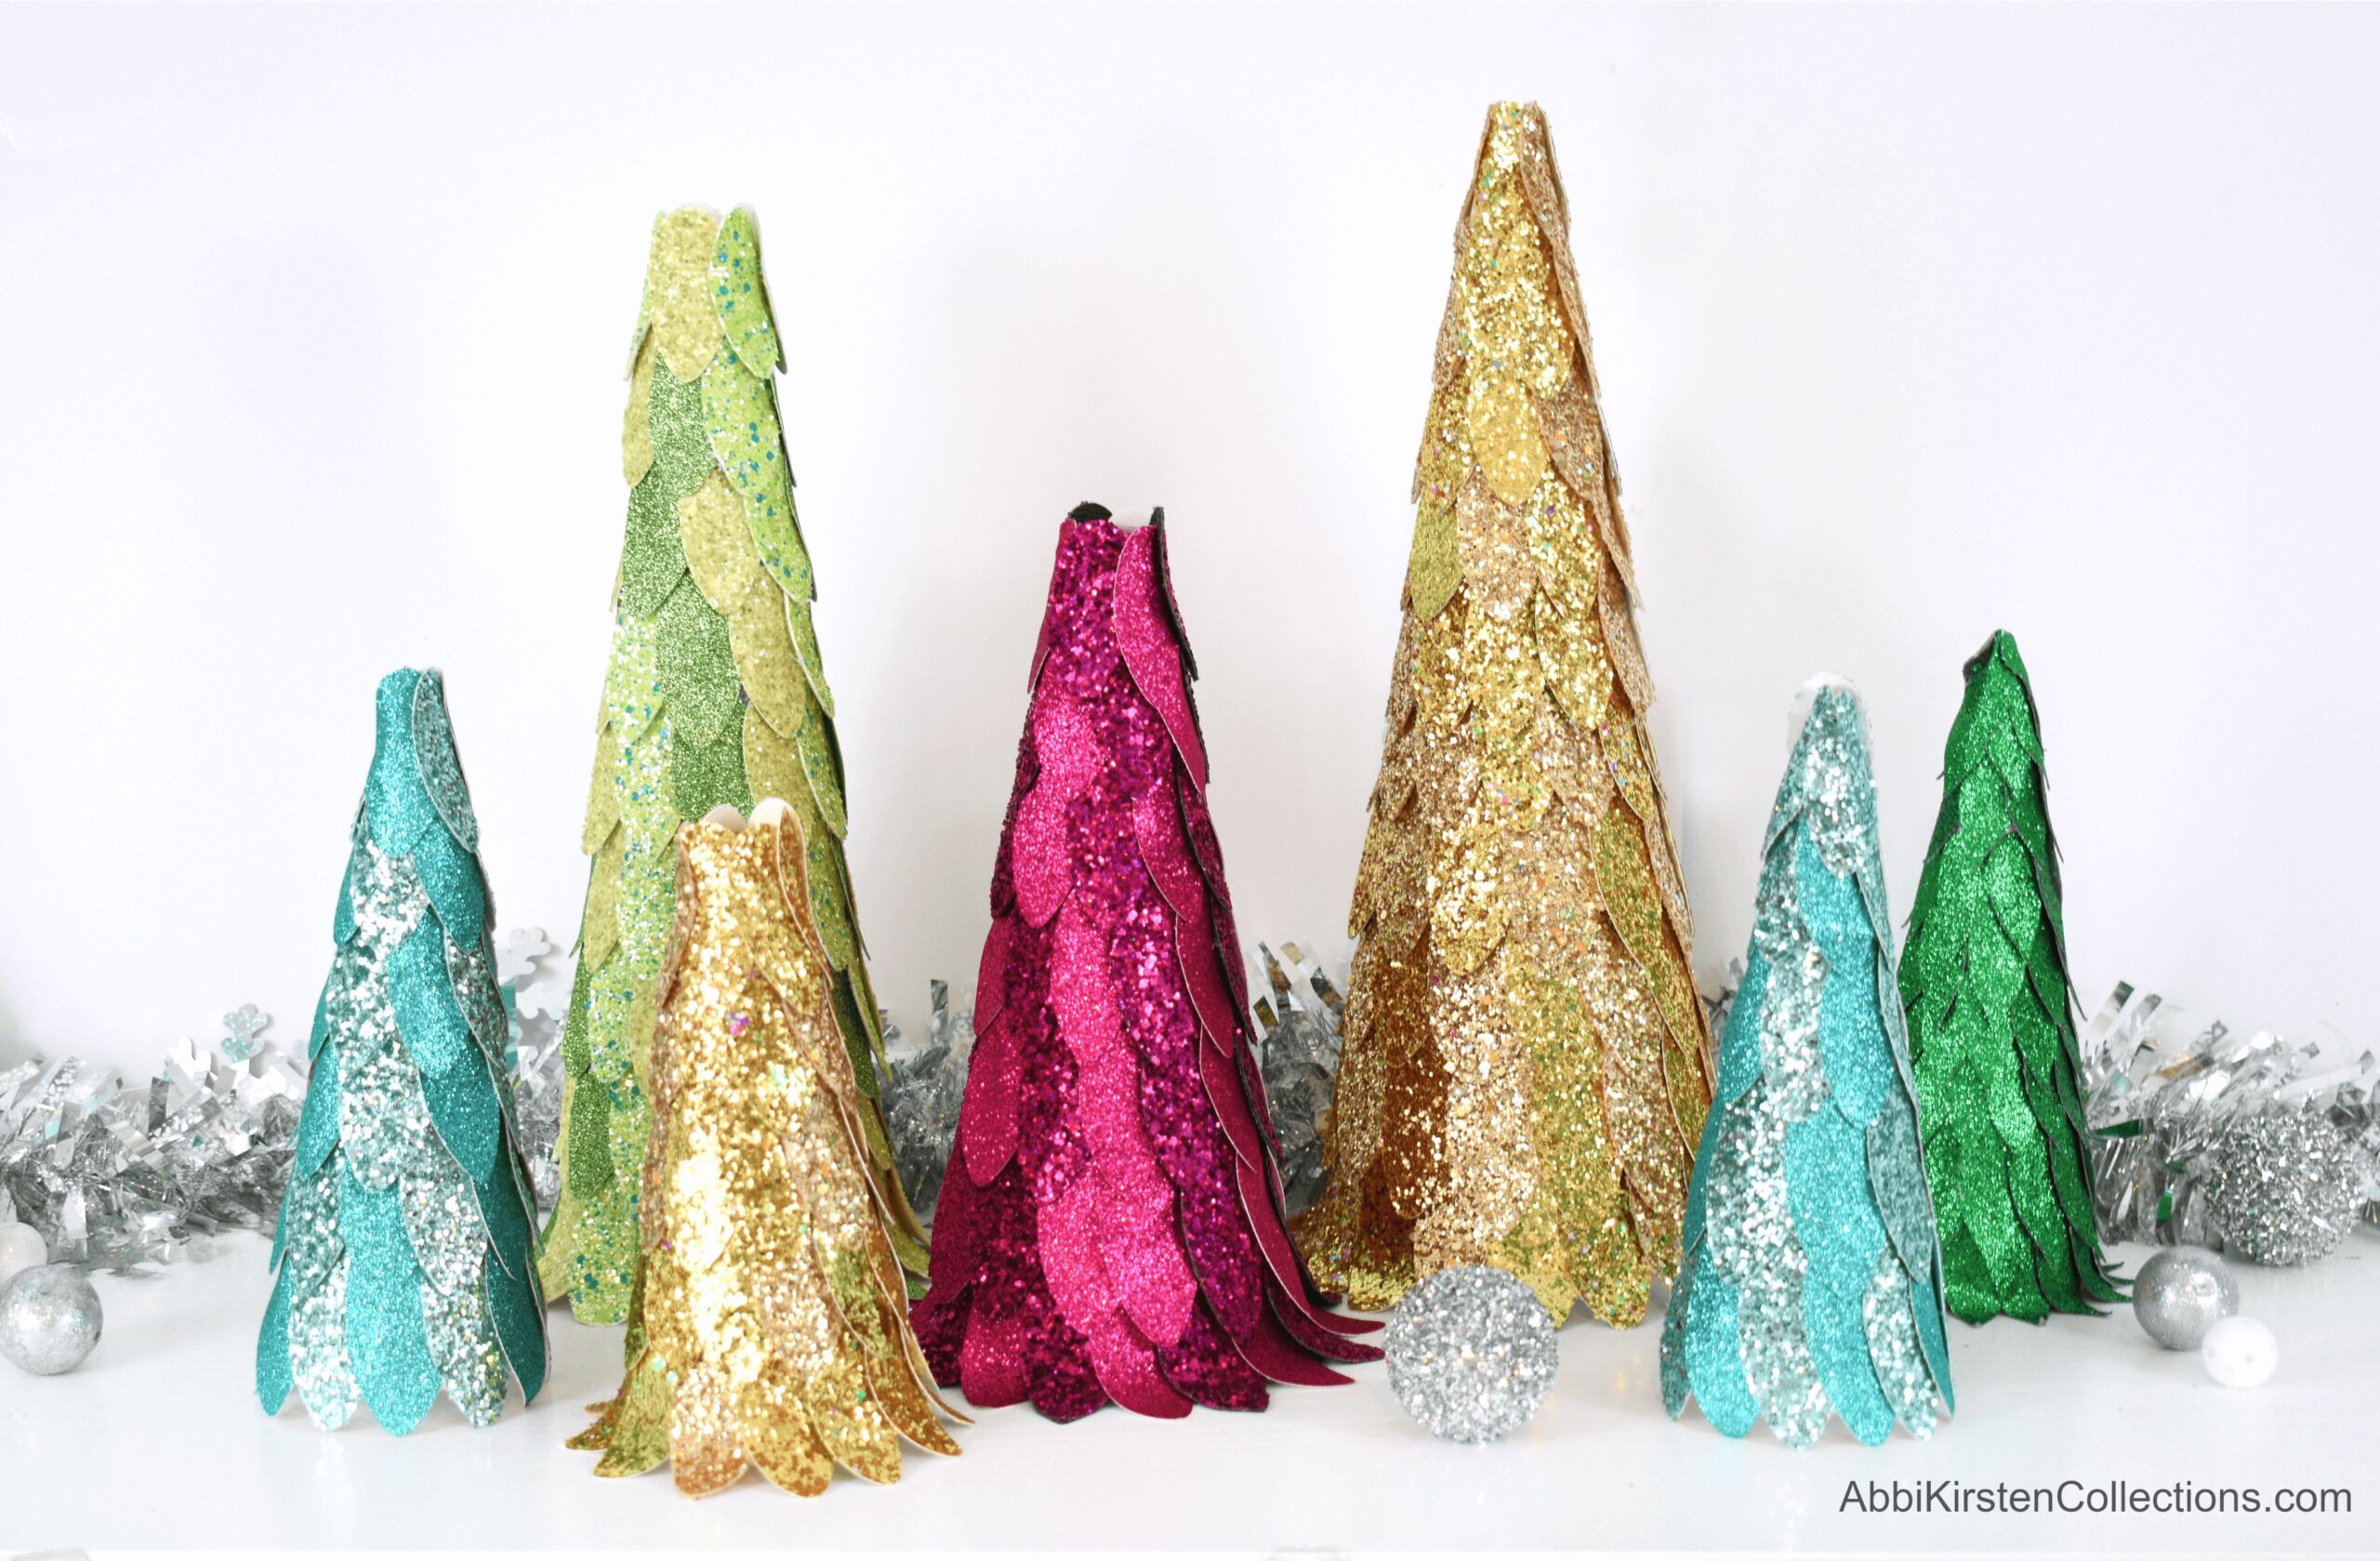 Seven sparkling faux glitter leather Christmas trees of varying heights sit on a white table in front of a silver garland. The trees are made from blue, silver, green, gold, and pink faux leather.